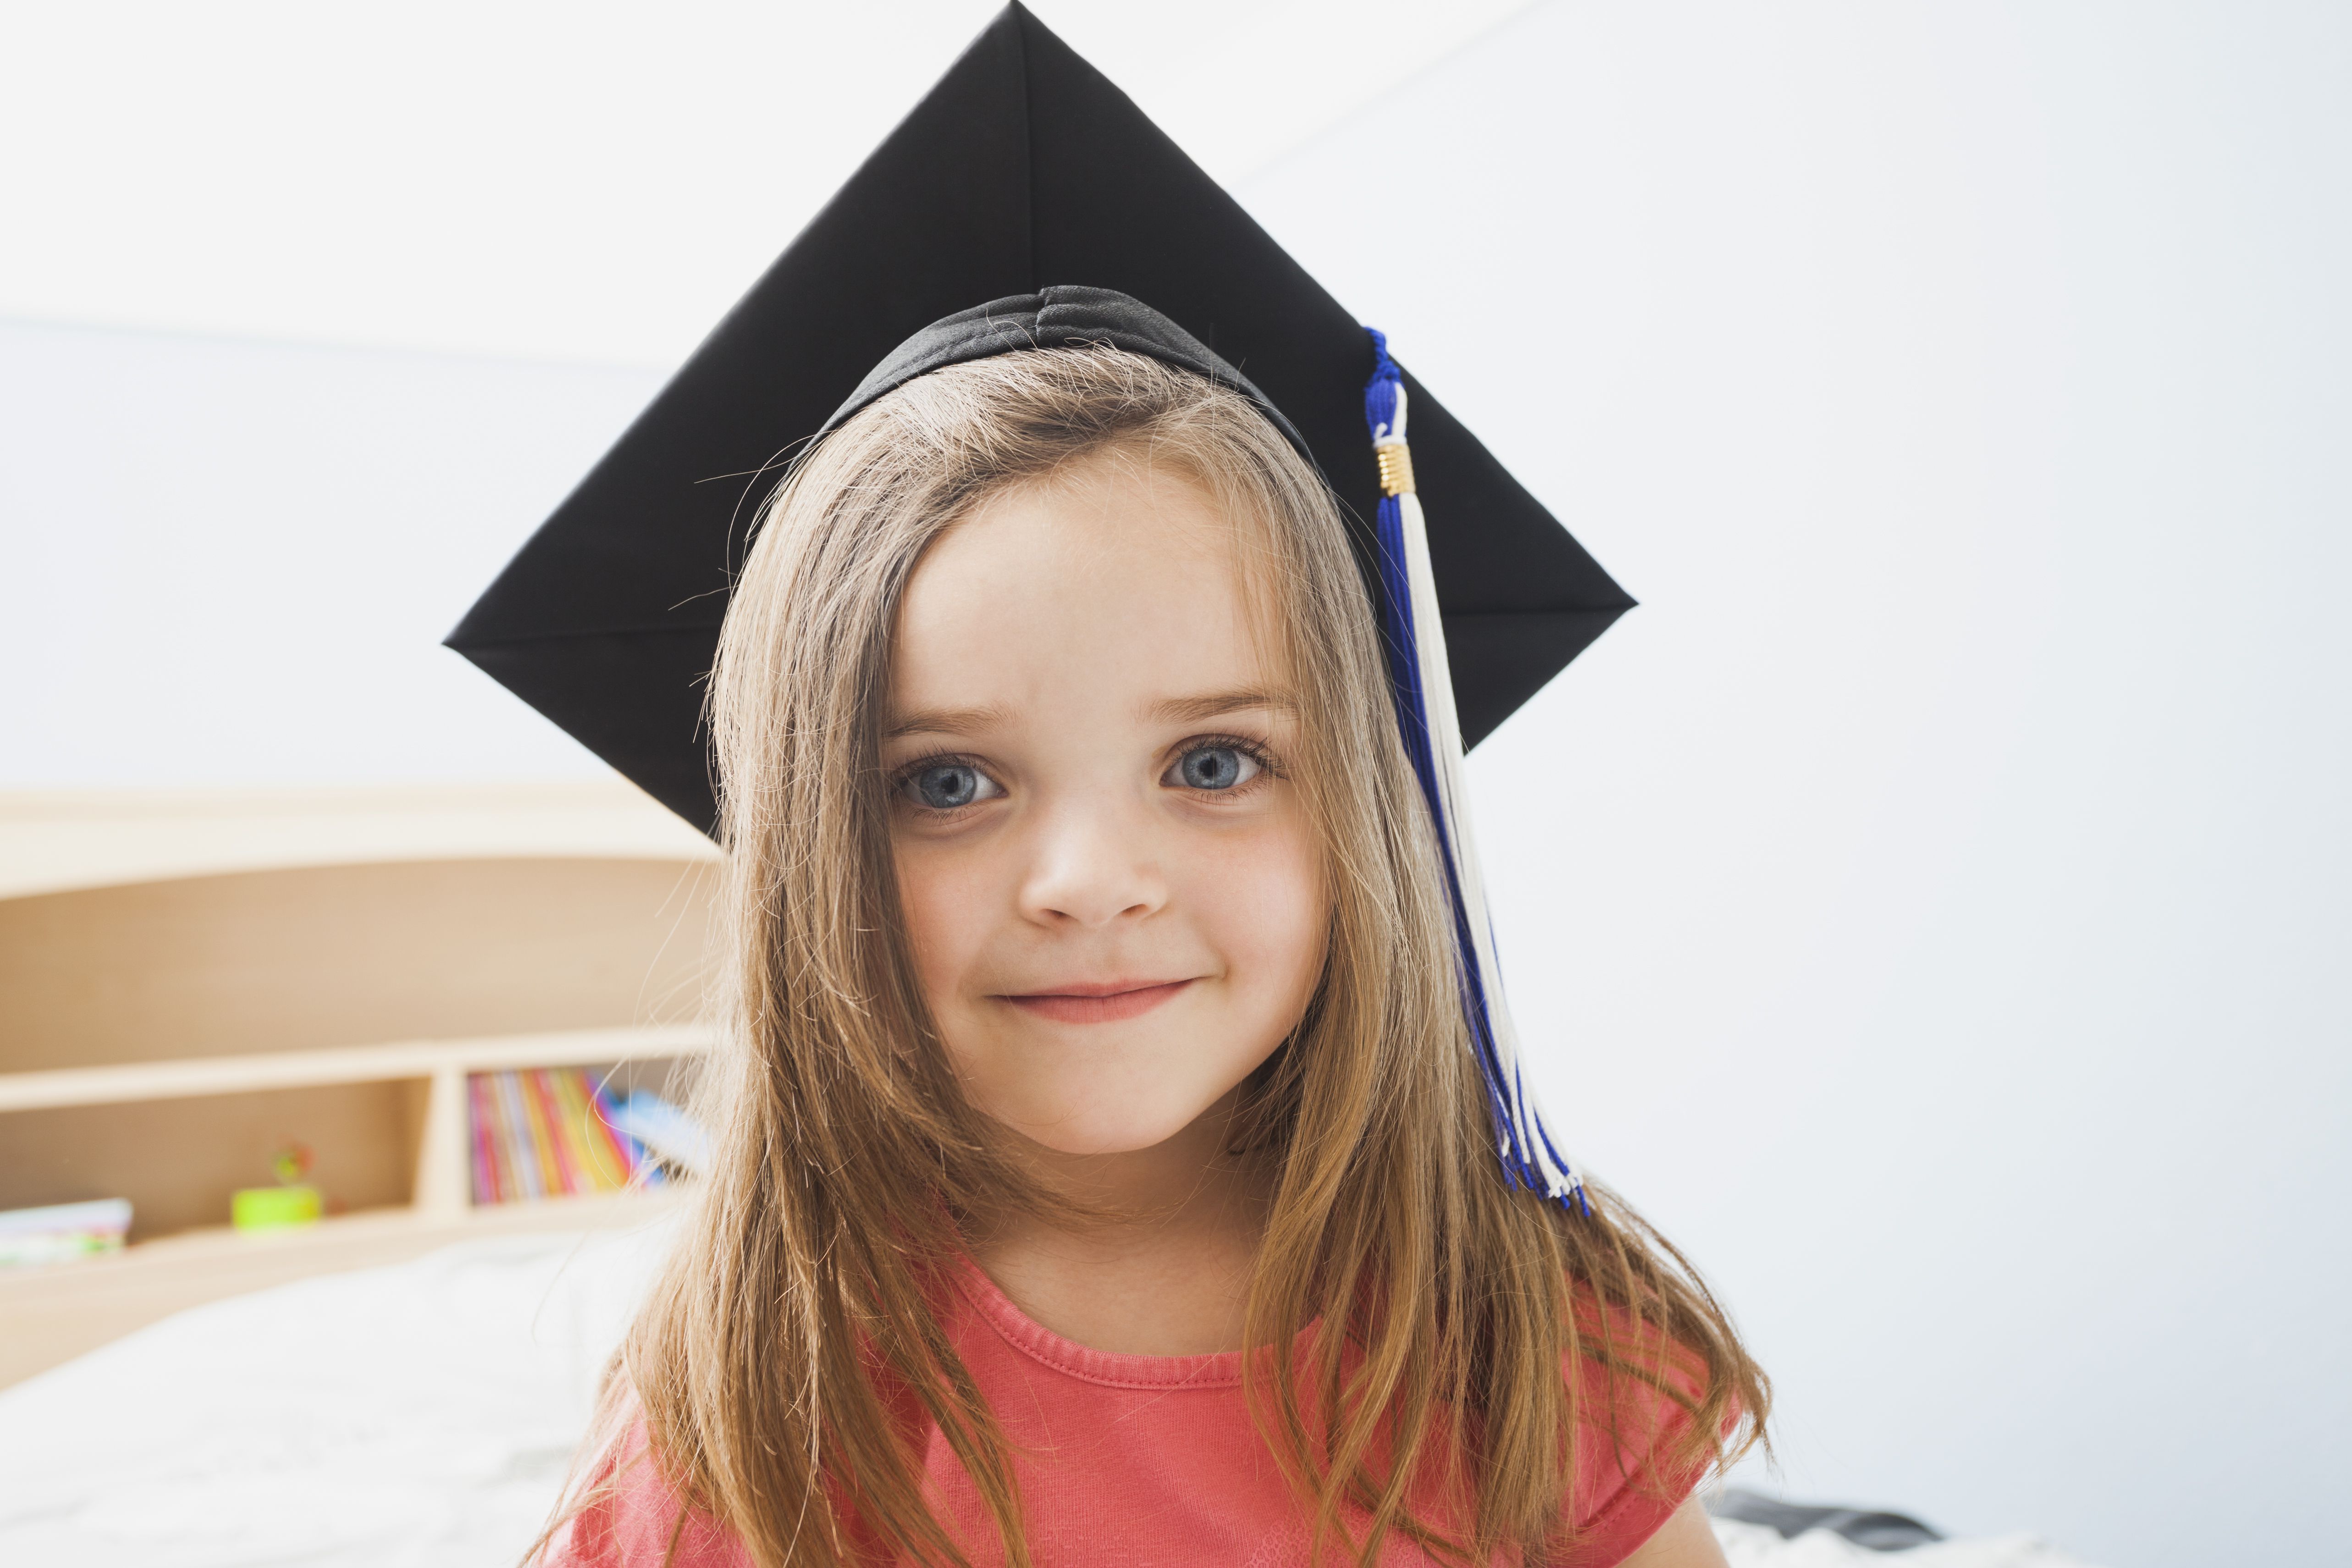 The Best Graduation Gifts for the Preschooler in Your Life